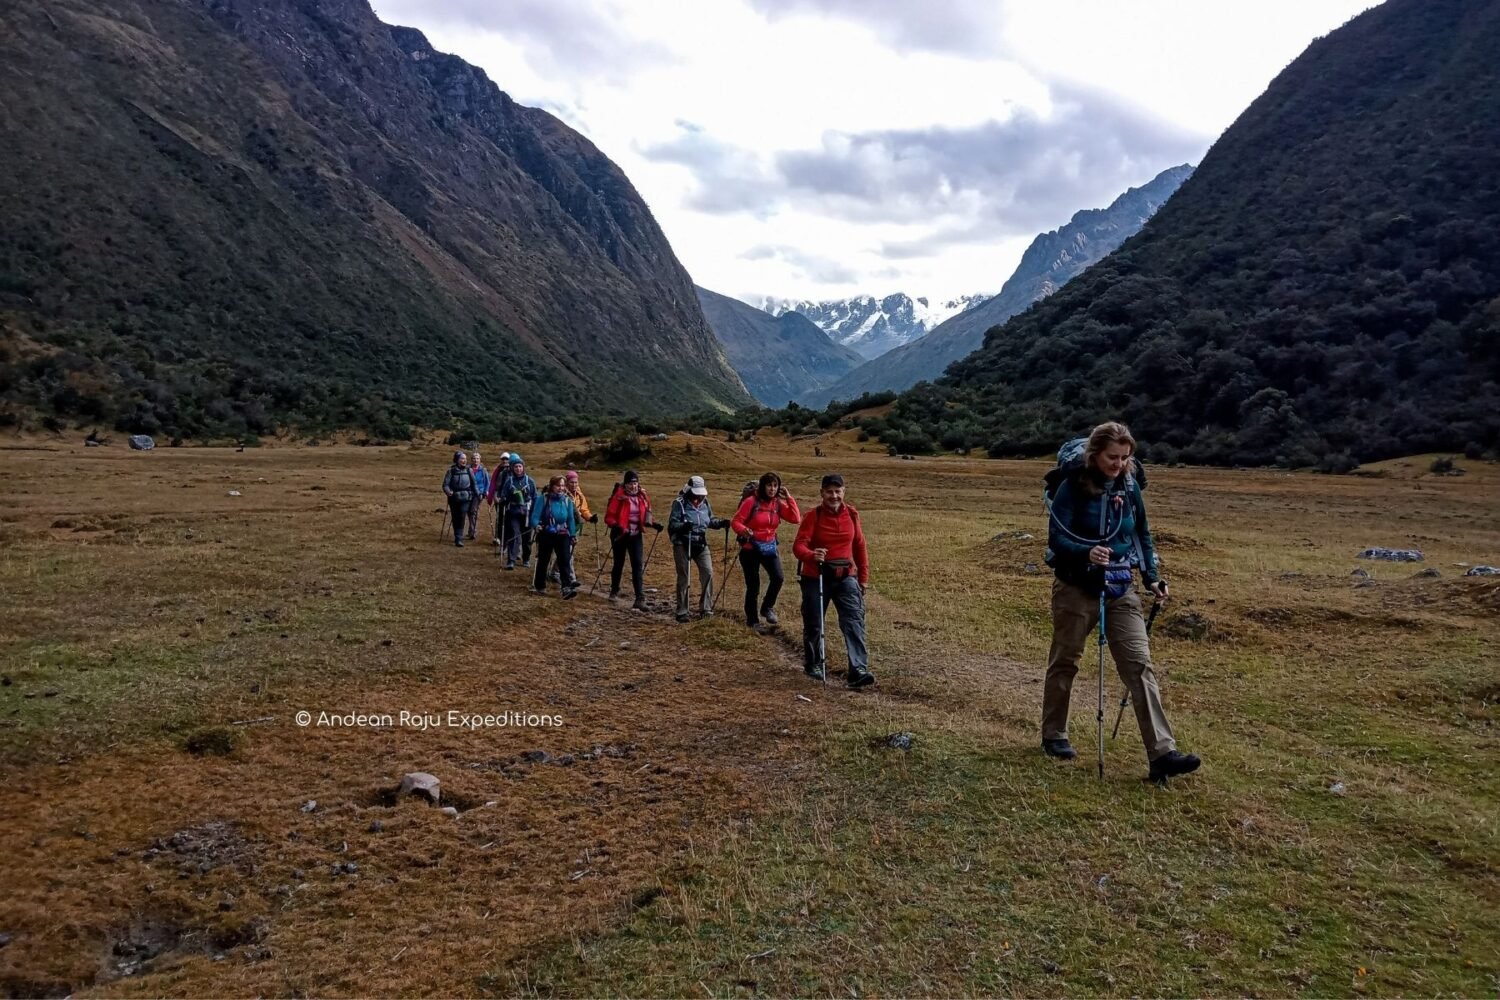 Our group walking to Vaqueria